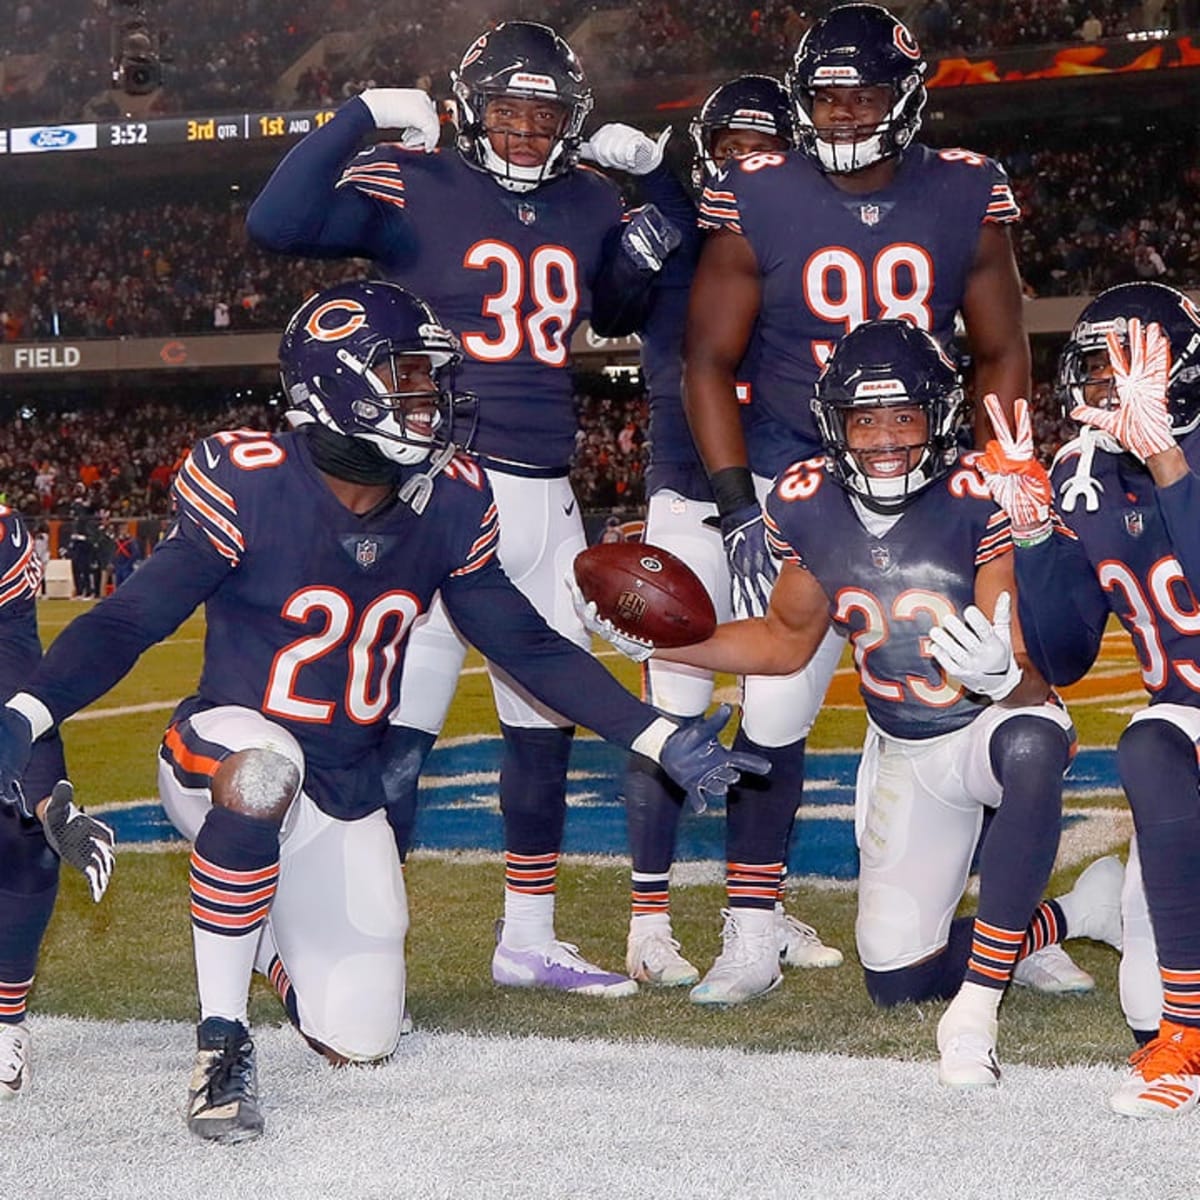 Bear Down, The 2020 Schedule is Here - On Tap Sports Net